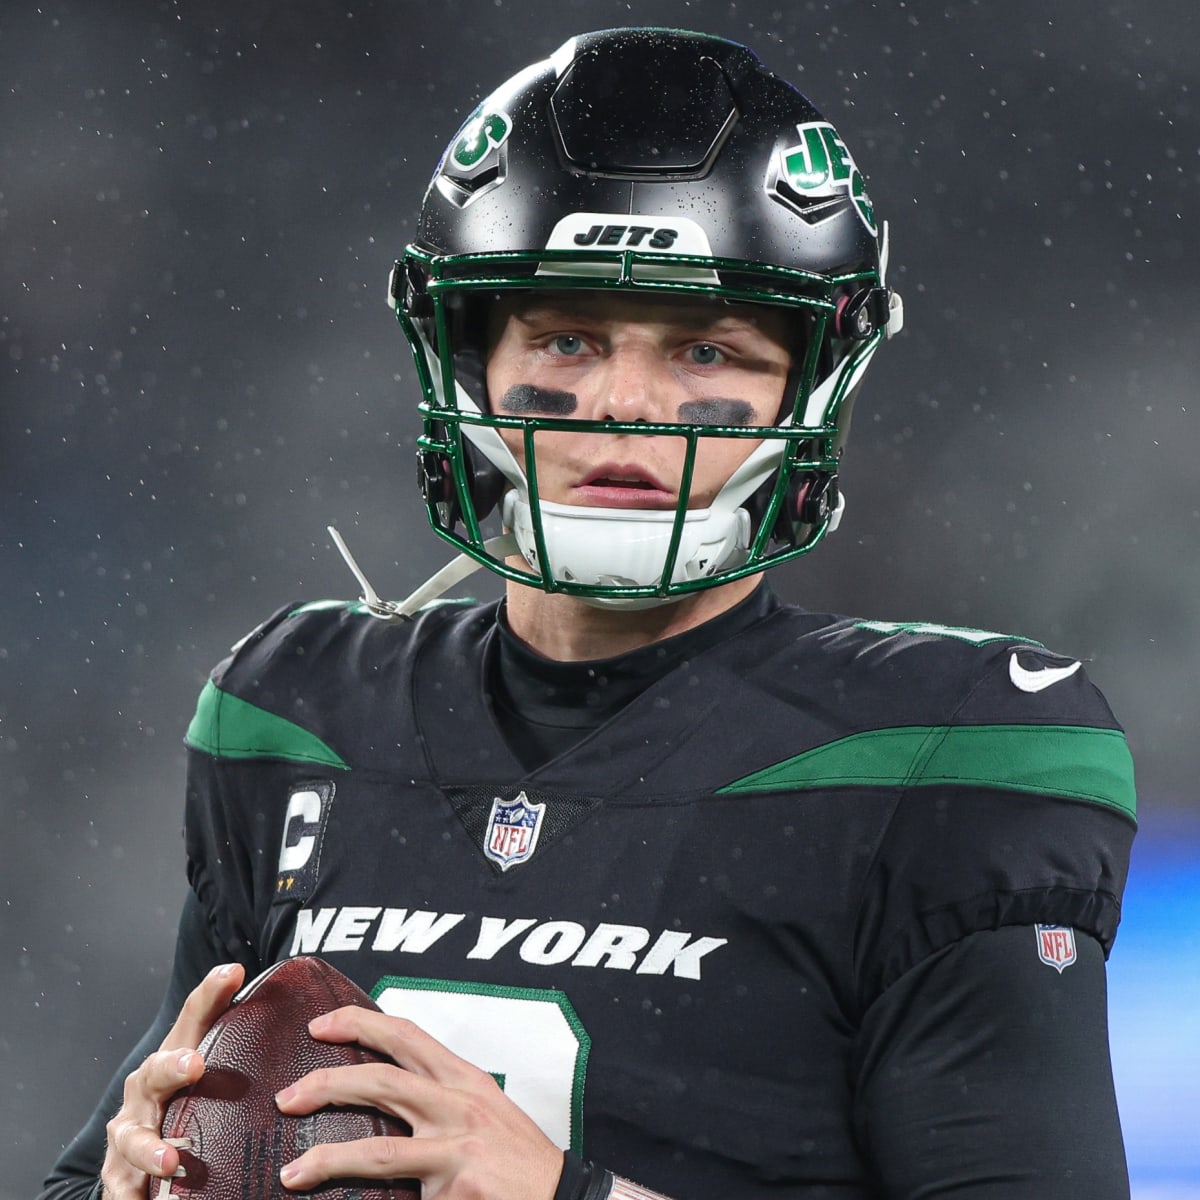 Jets' Zach Wilson Gets Benched As Jaguars Cruise to Victory on TNF